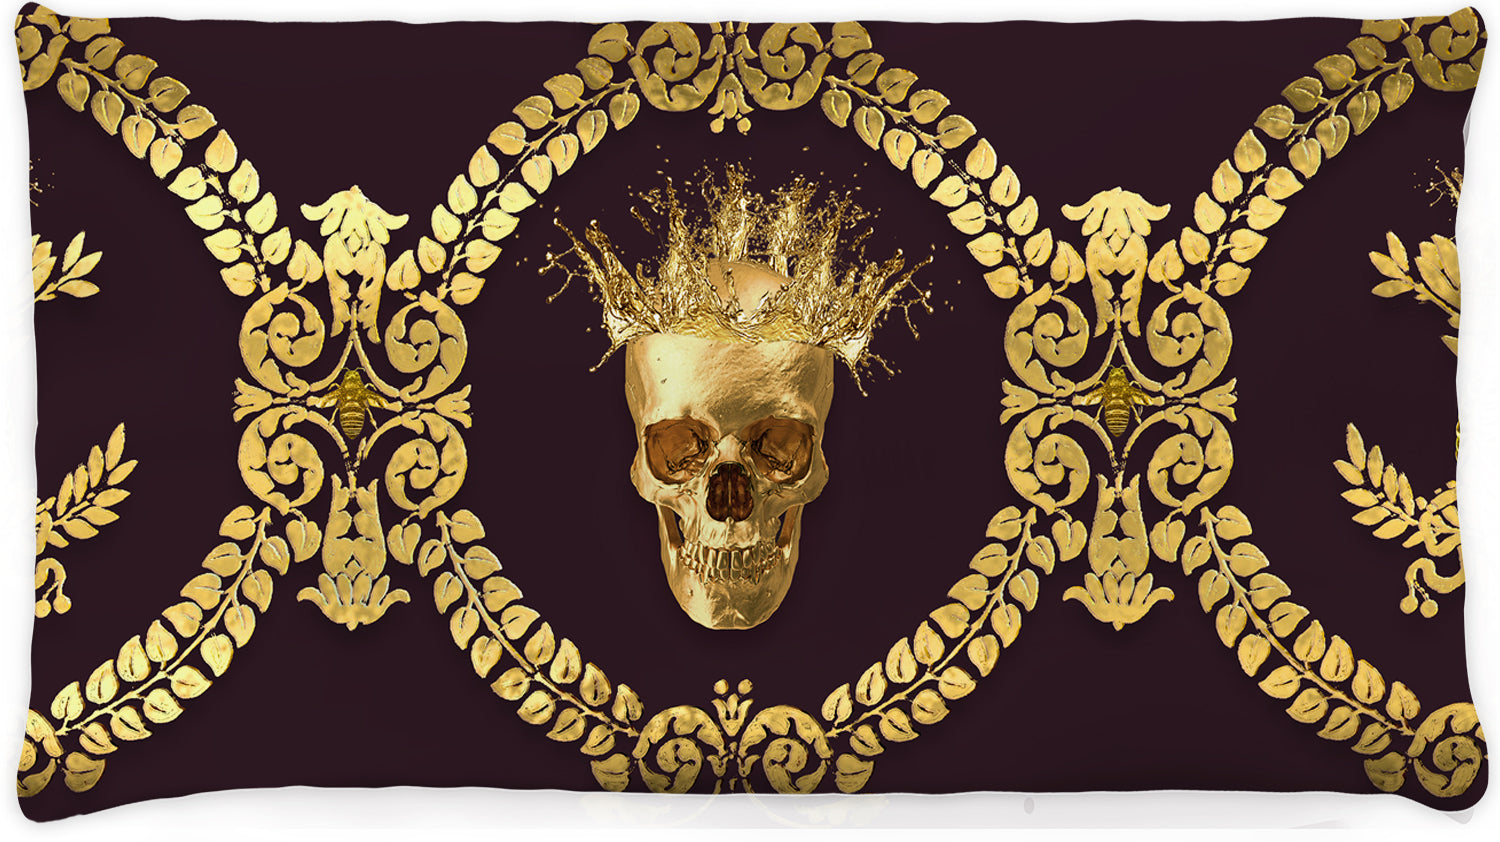 Caesar Gilded Skull & Bees- Singles & Body Pillow in Muted Eggplant Wine | Le Leanian™ | The Photographist™